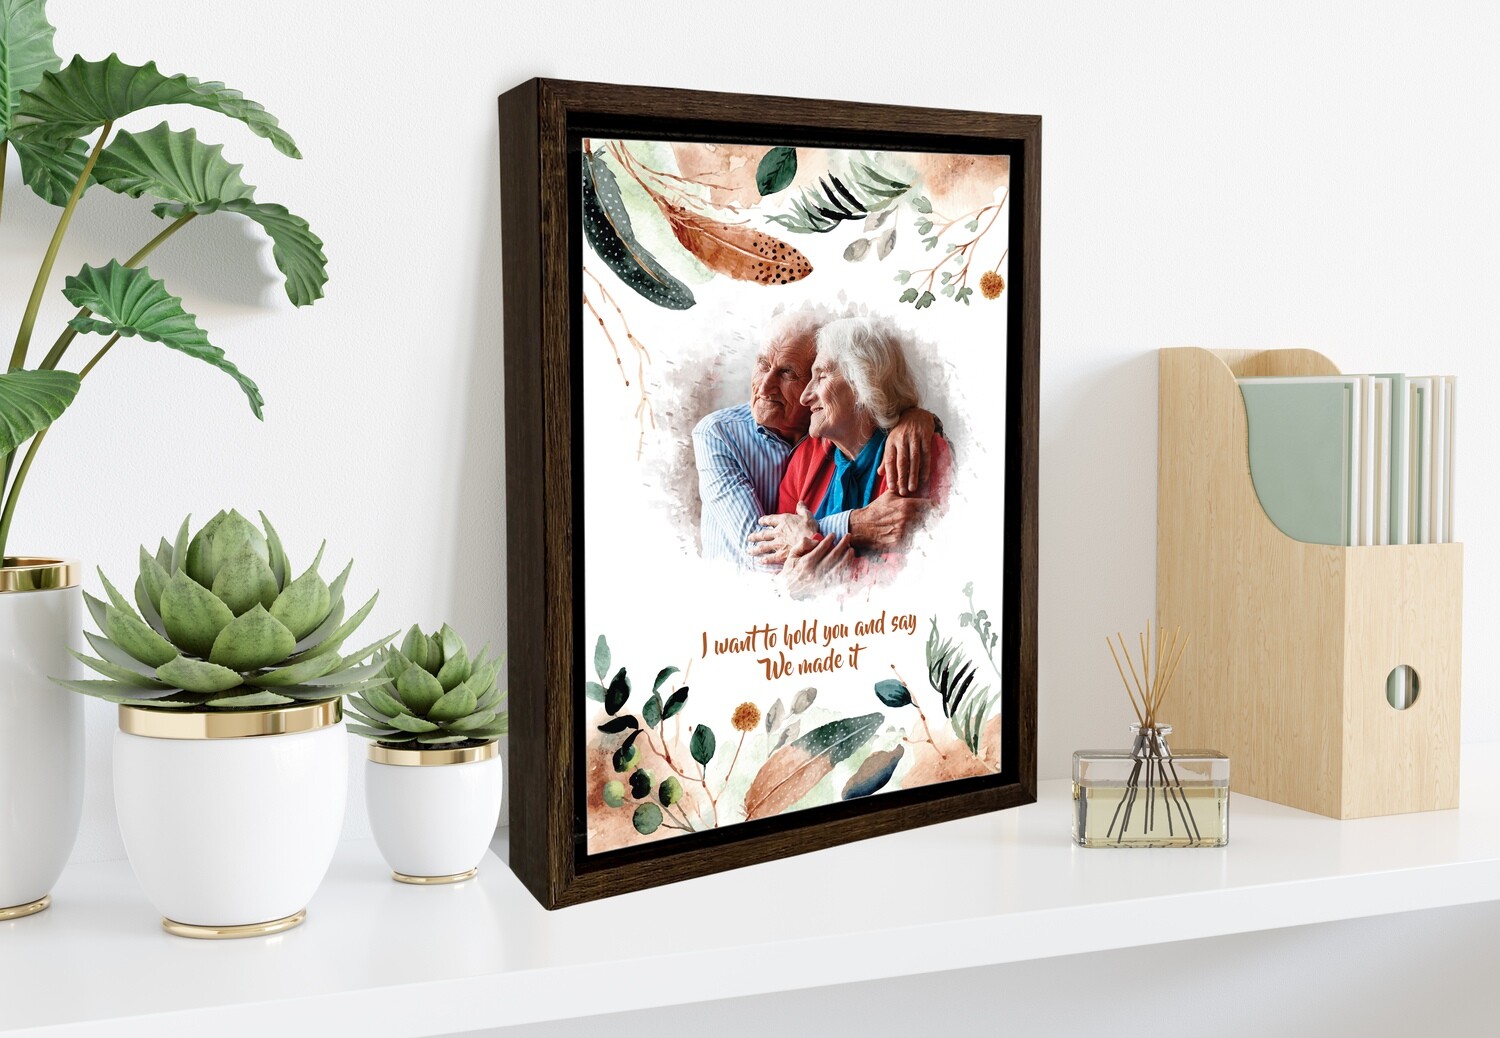 Wedding Gift For Parents|Personalised Couple Portrait |Anniversary Gift For Grand parents|Gift For Couple| Custom Photo Printed On Aluminum|Custom Box Frame